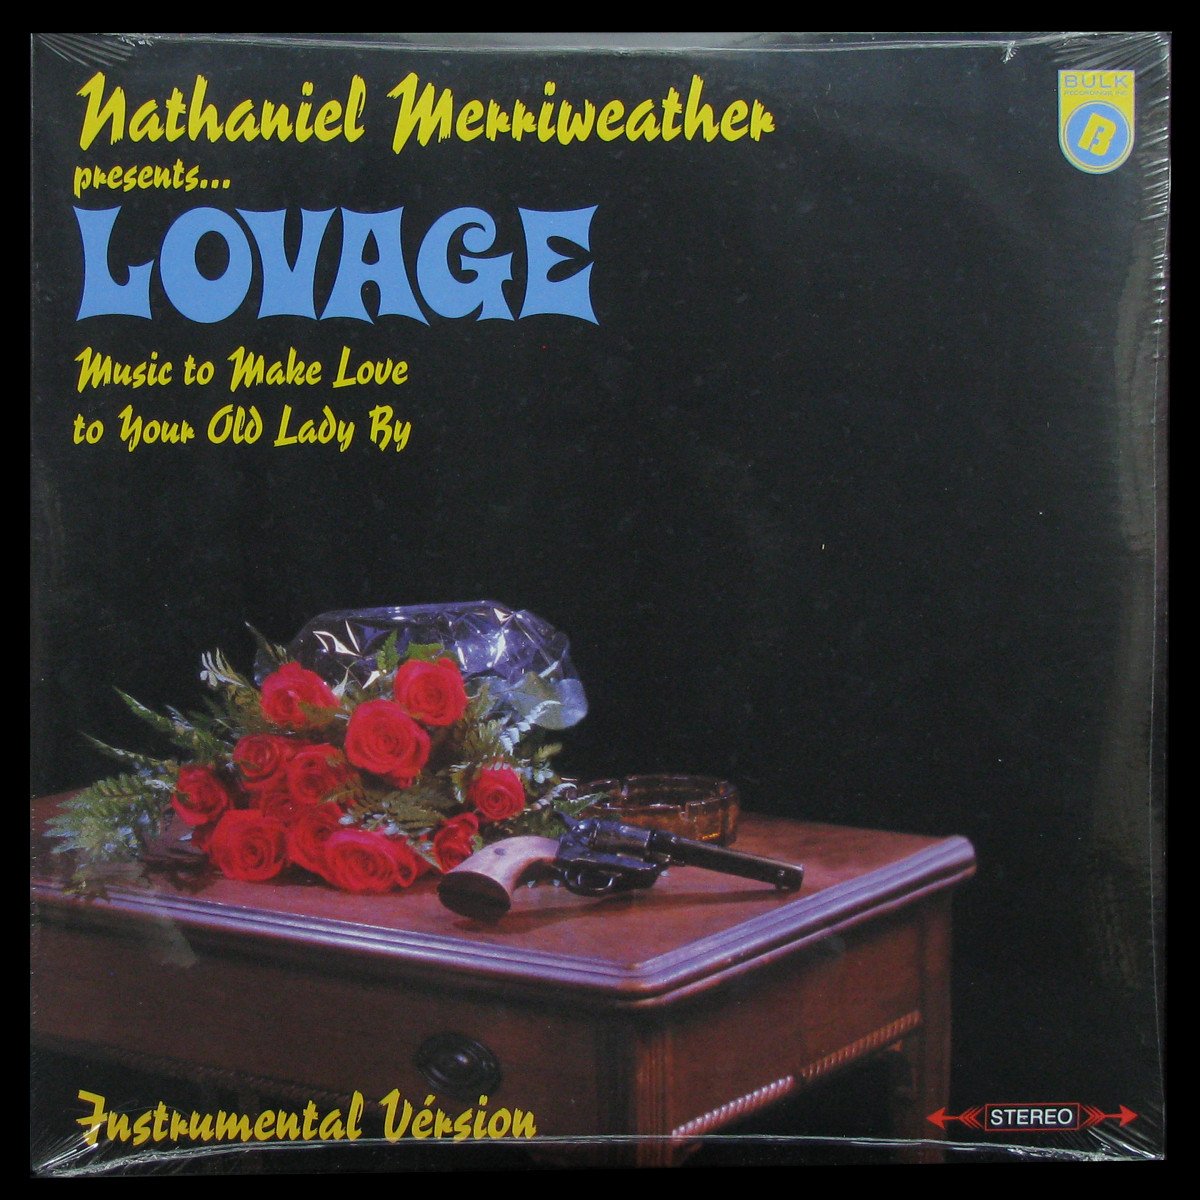 LP Nathaniel Merriweather / Lovage — Music To Make Love To Your Old Lady By (Instrumental Version) (2LP, coloured vinyl) фото